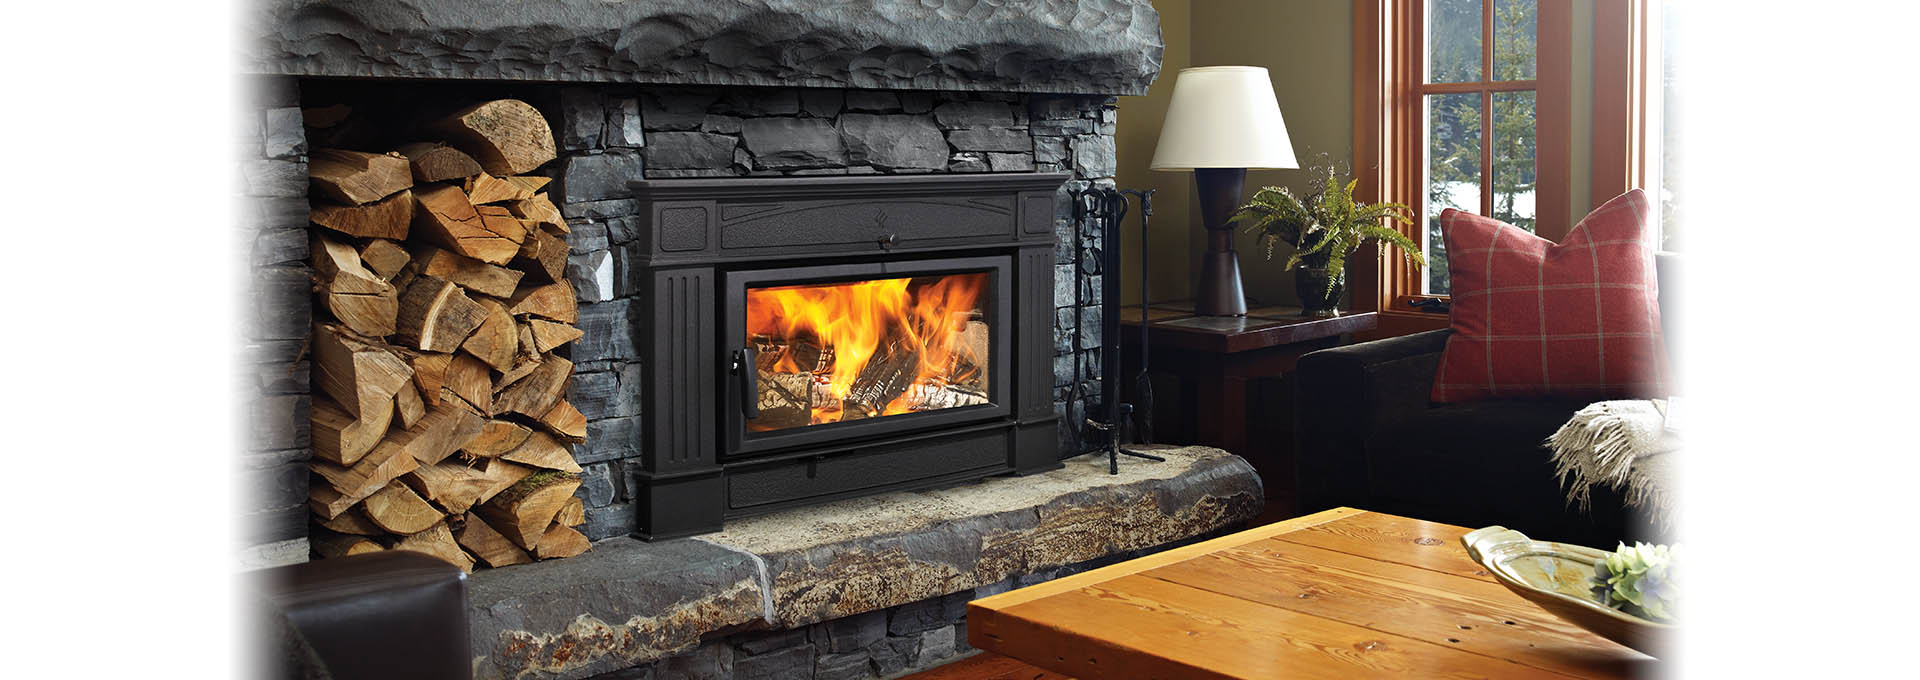 Hampton Hi500 Wood Insert with dark natural cut stone surround and wood pile stacked next to it